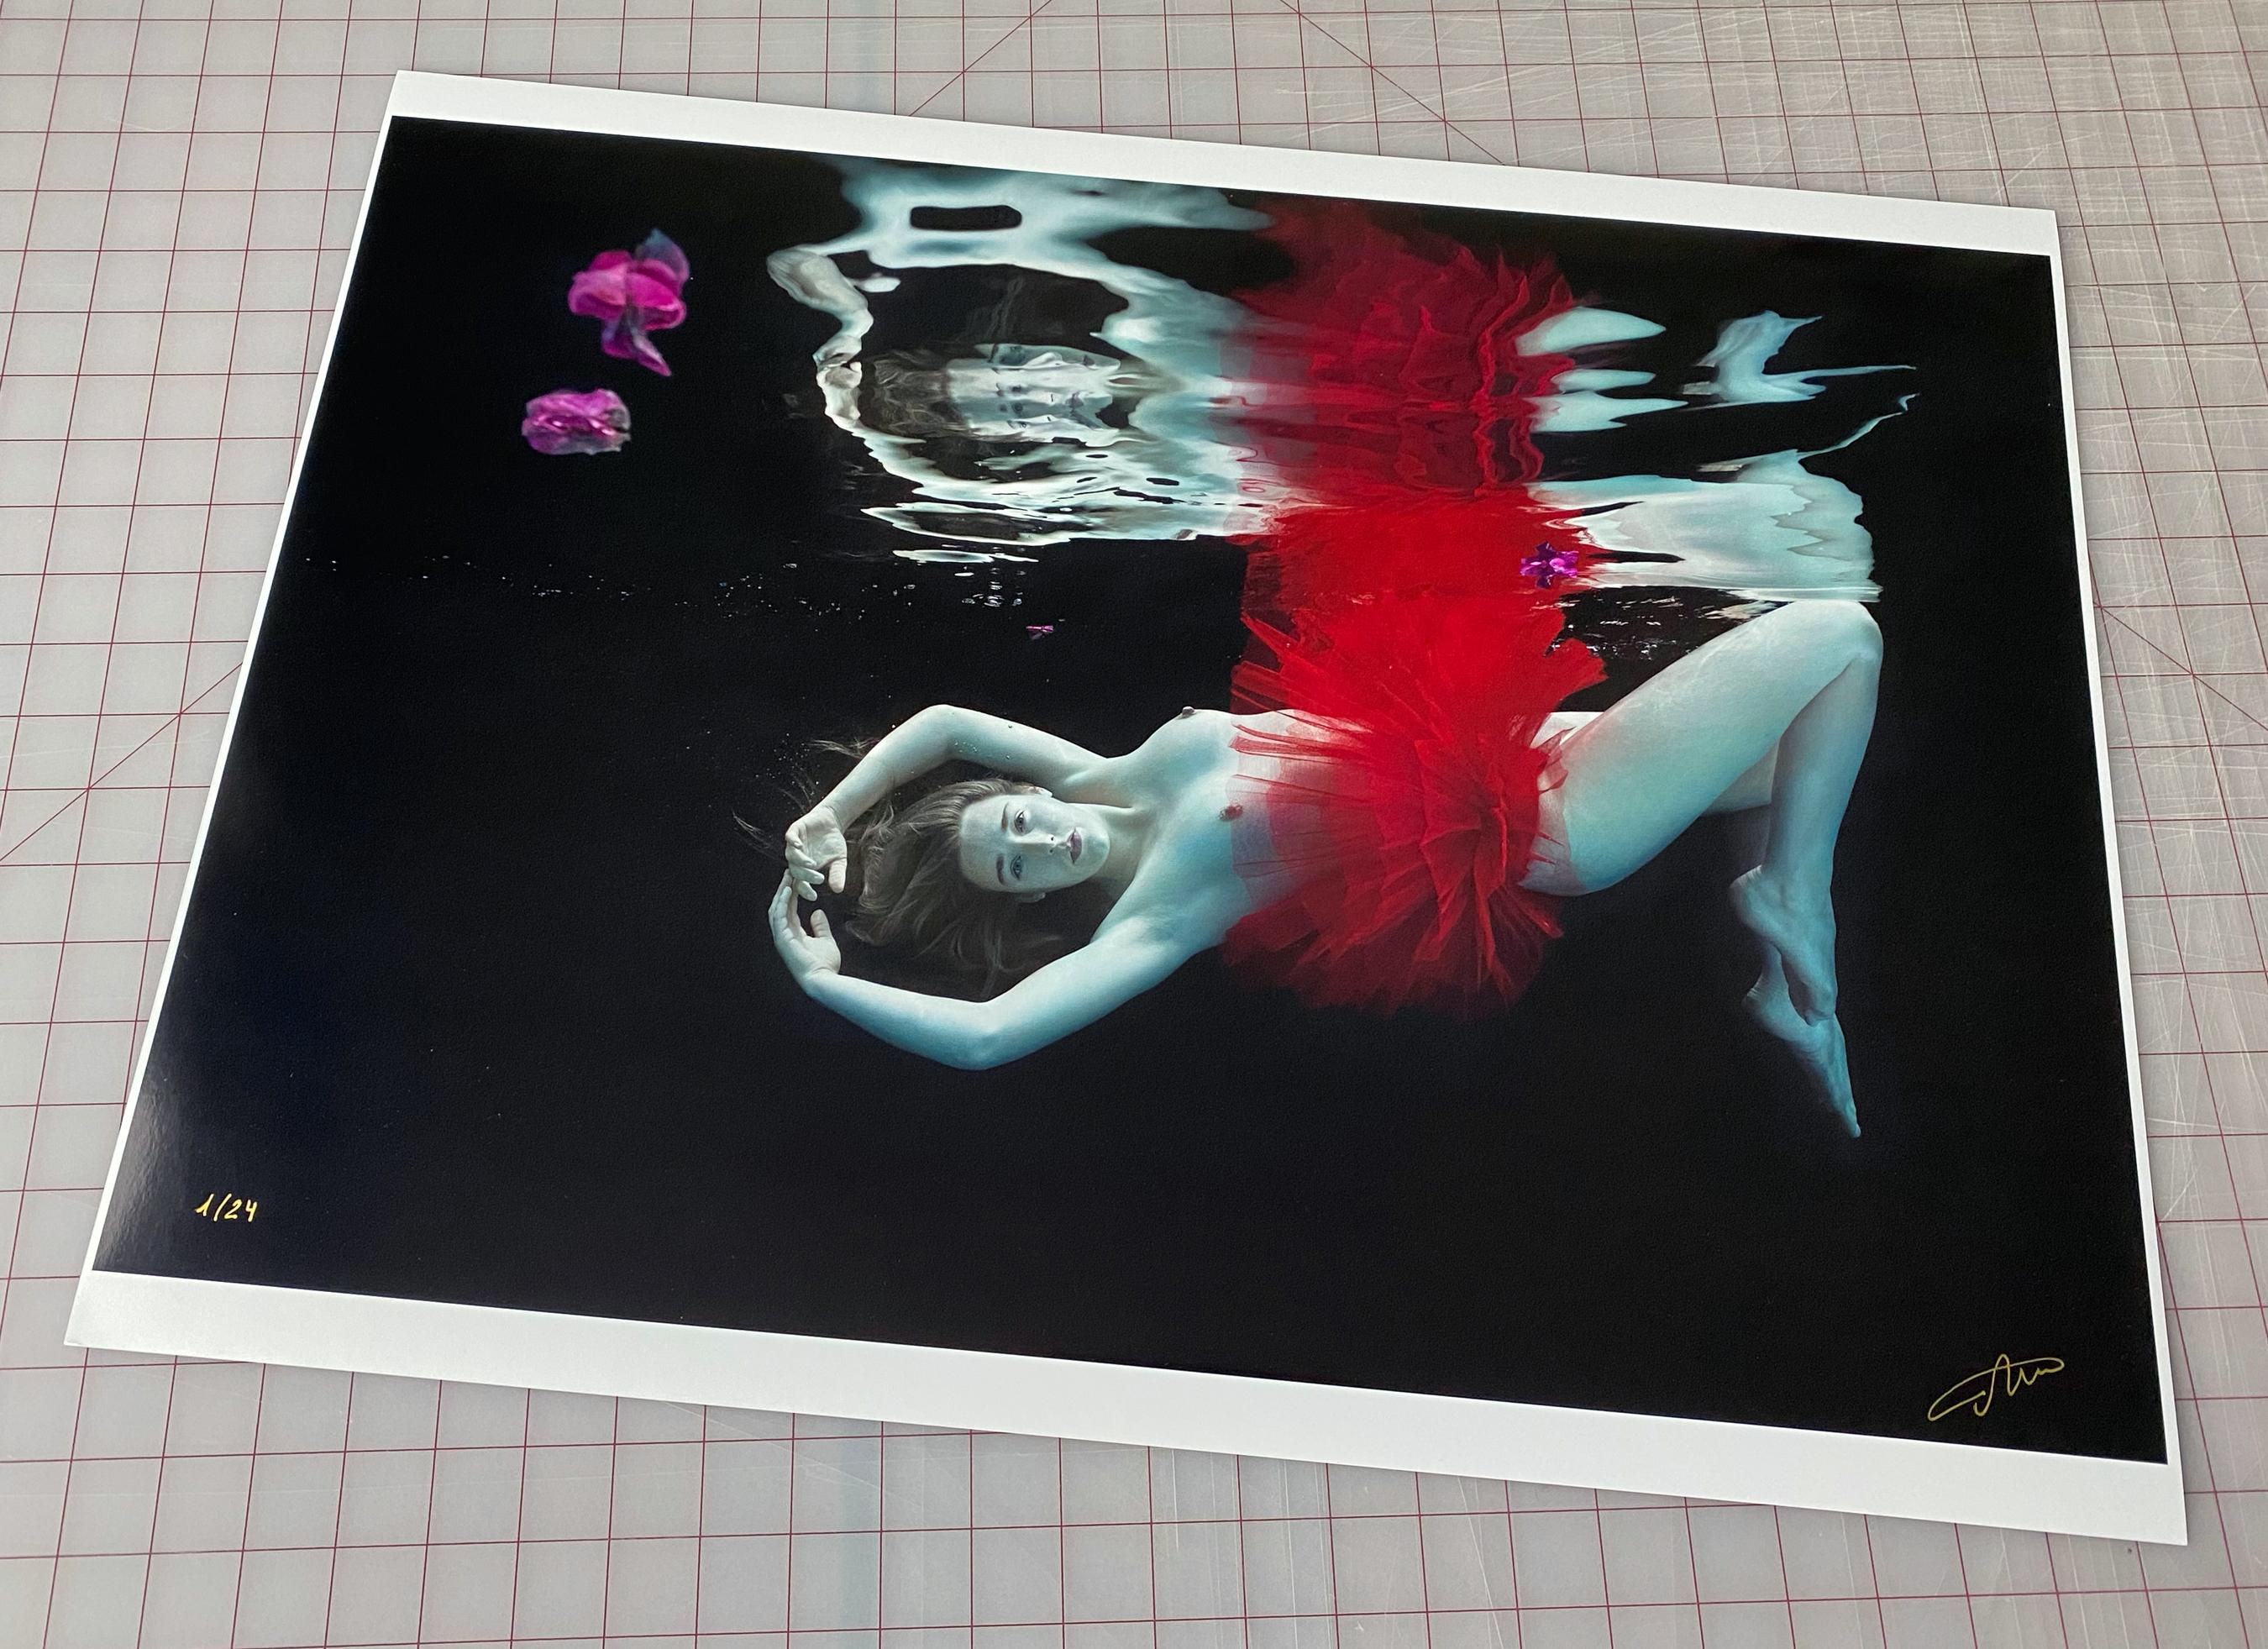 An underwater photograph of a topless dancer diving in red tutu skirt.

Original digital print on archival paper signed by the artist.
Paper size: 18